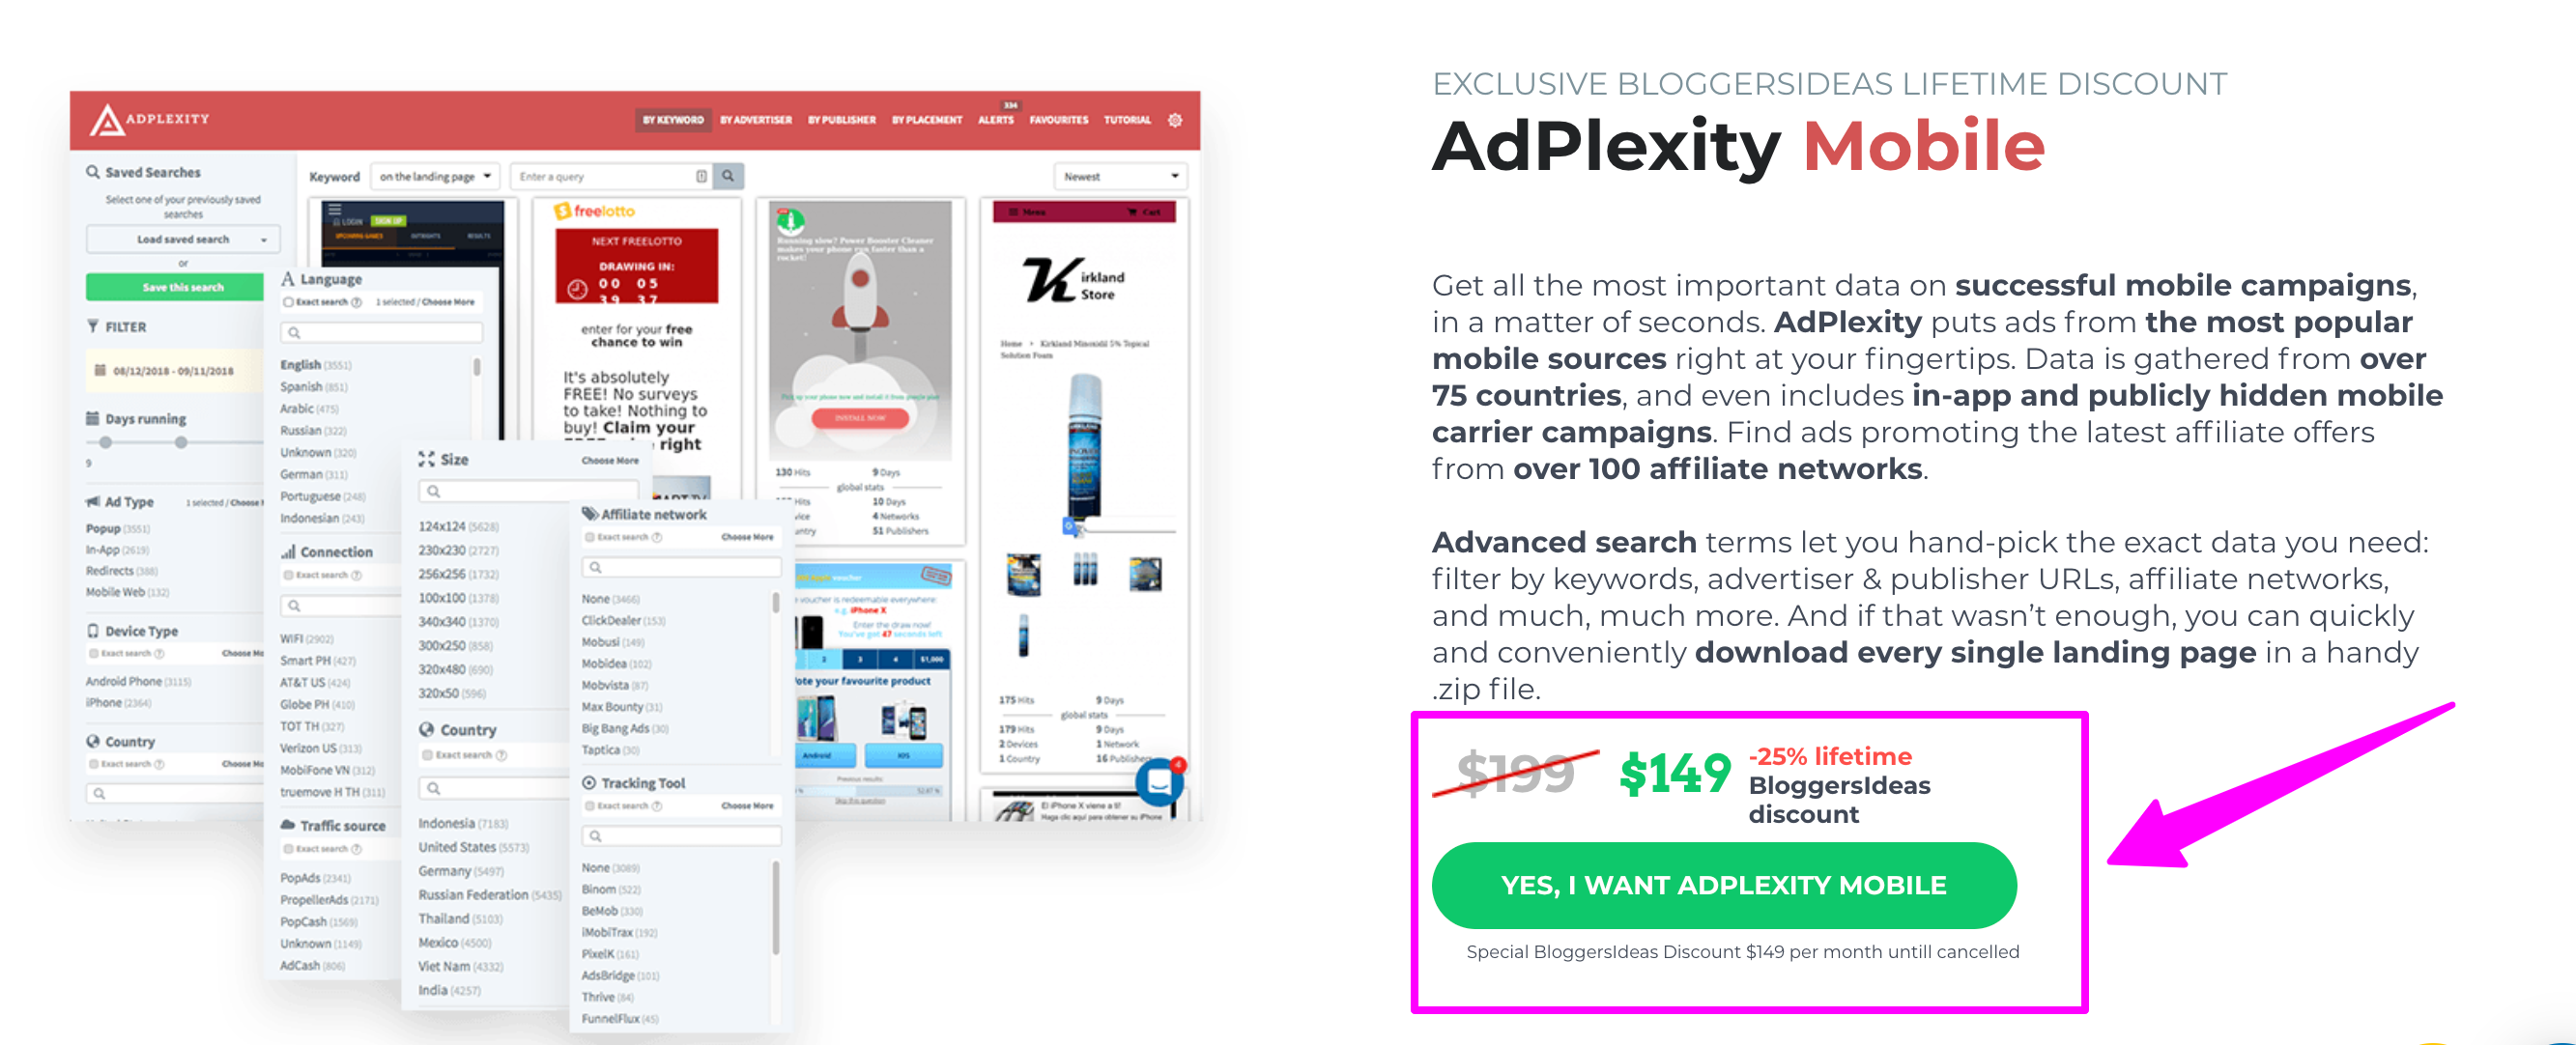 adpelxity mobile